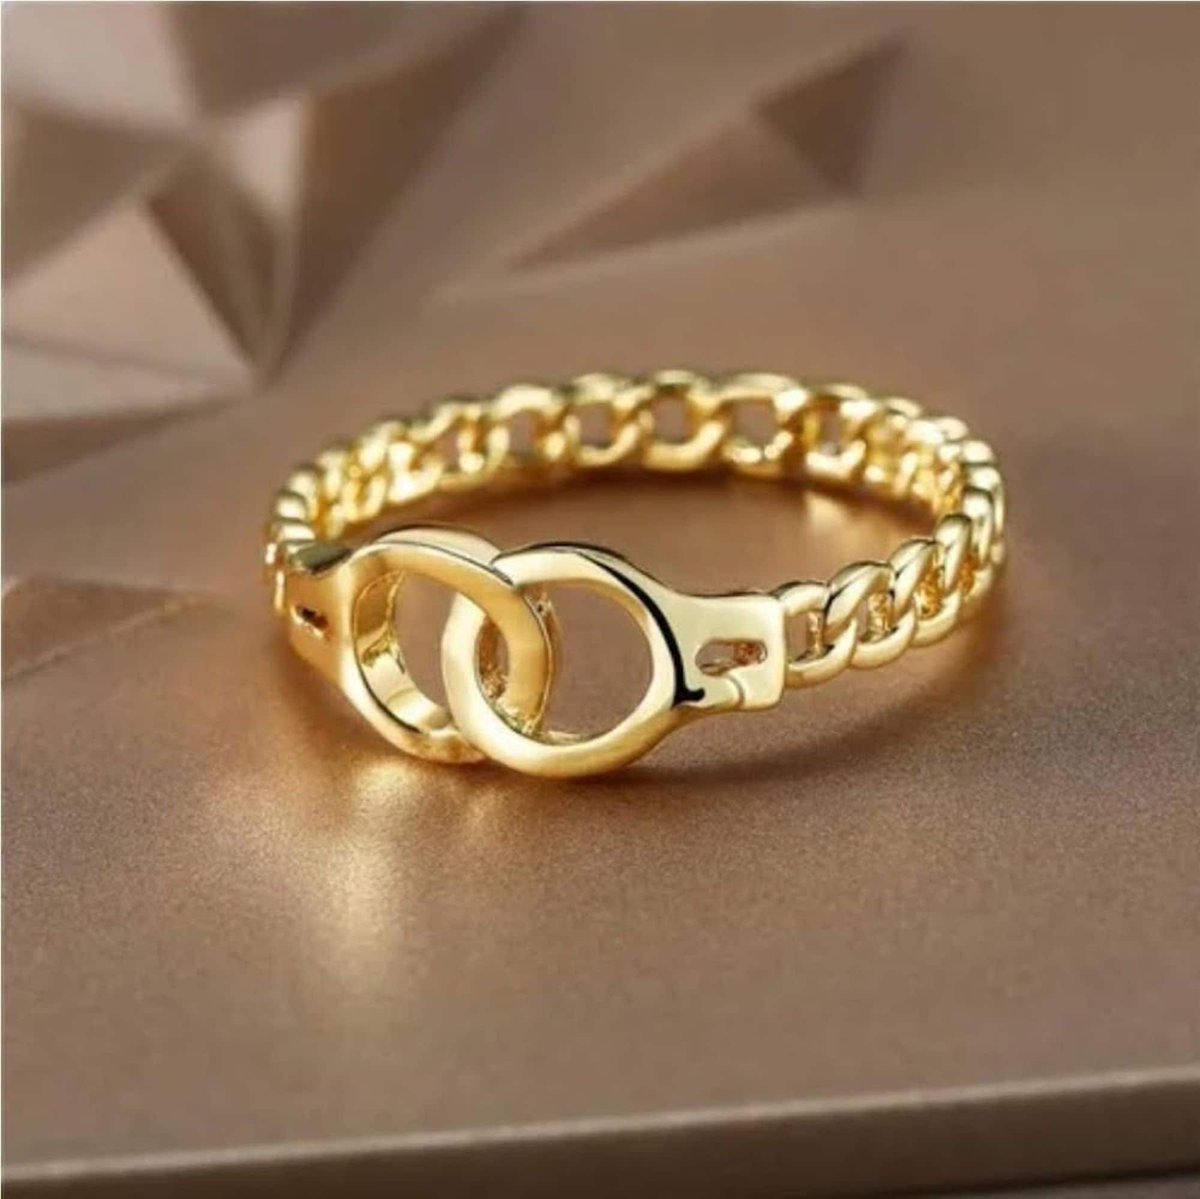 Excited to share the latest addition to my #etsy shop: Bling Jewelry Secret Shades Handcuff Rings Gold Plated Stainless Steel etsy.me/3BqFeBU #gold #no #unisexadults #stainlesssteel #handcuff #ring #jewelry #unisexring #fashionistalisa64